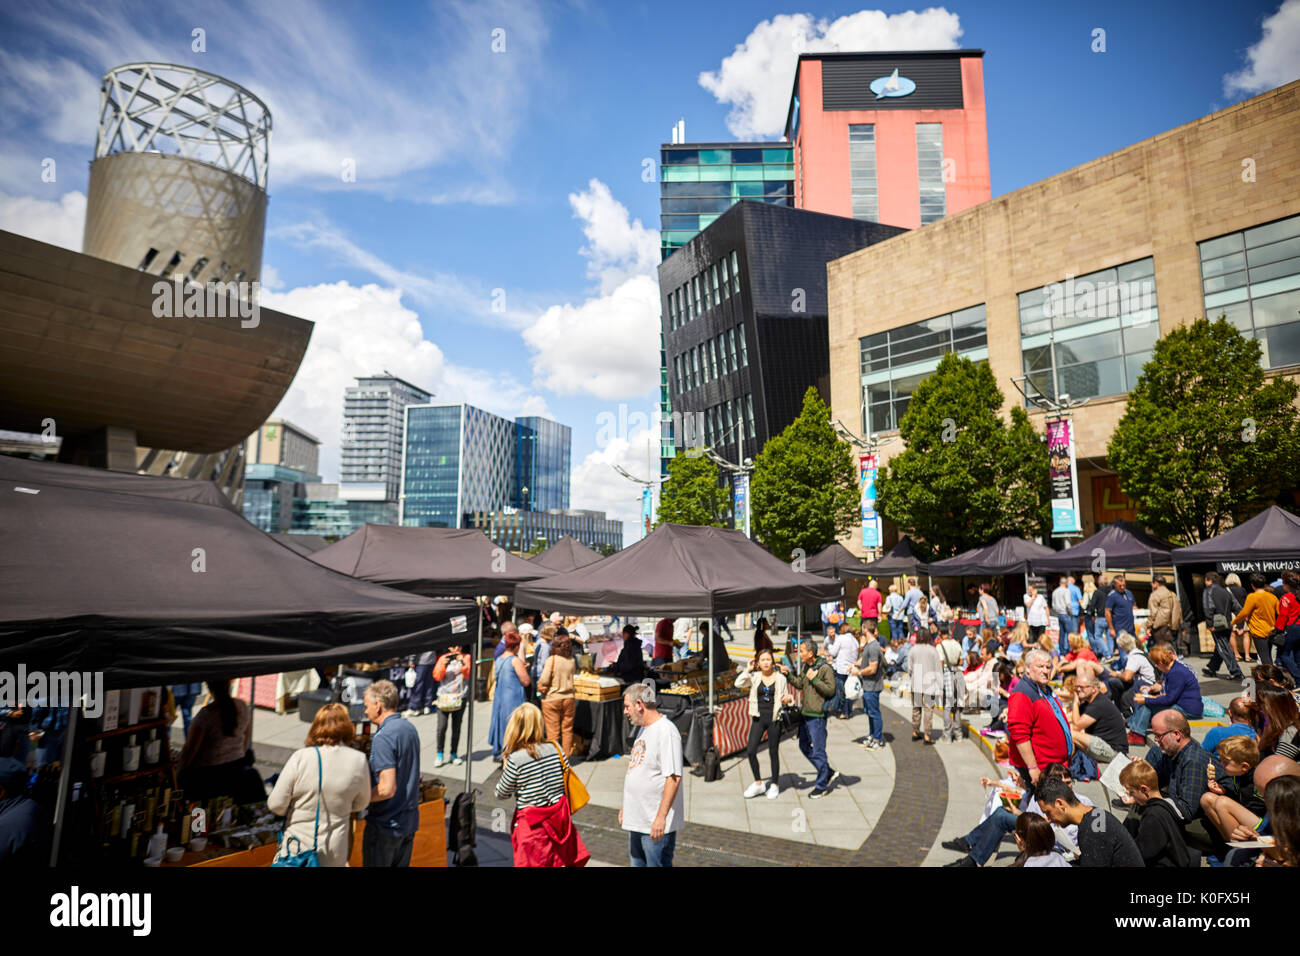 The Lowery Outlet at Salford Quays 'Makers Market' Stock Photo